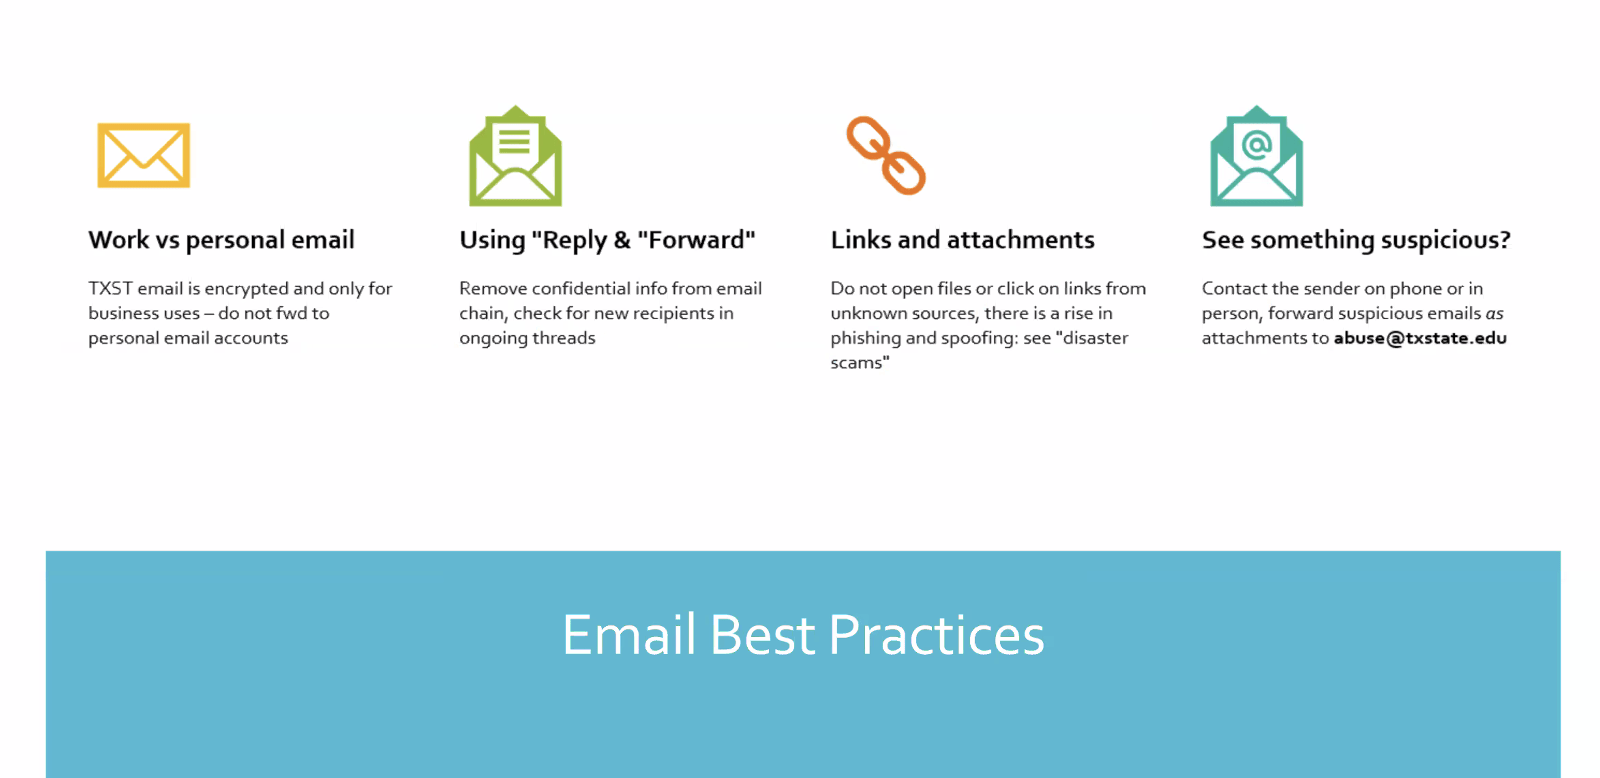 Image with Email best practices mentioned above. 